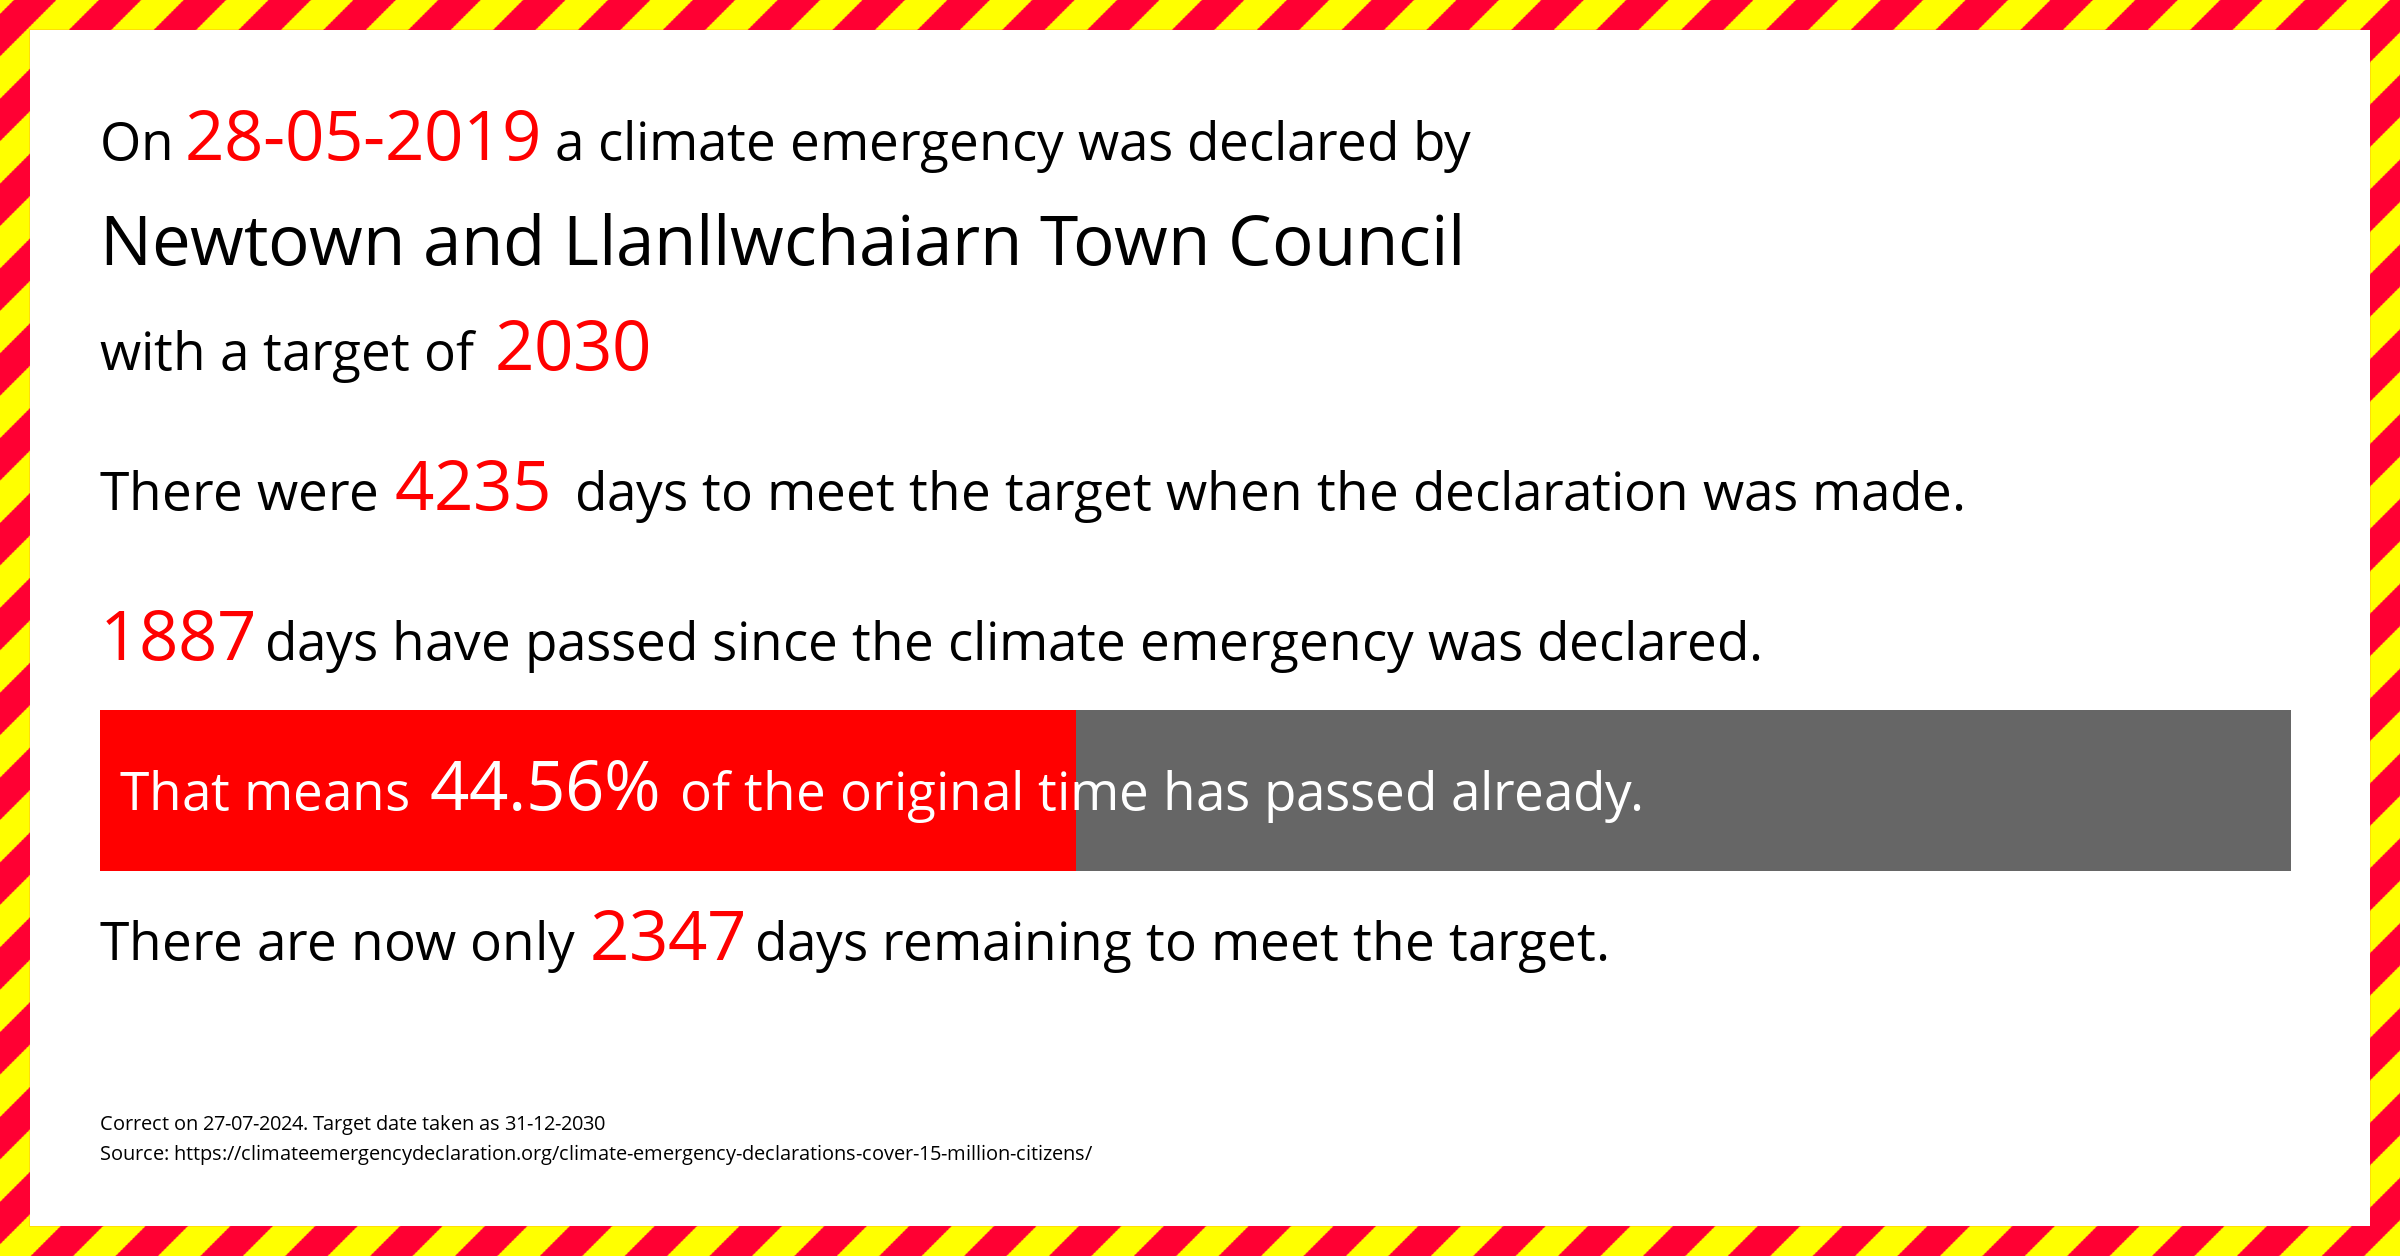 Newtown and Llanllwchaiarn Town Council declared a Climate emergency on Tuesday 28th May 2019, with a target of 2030.